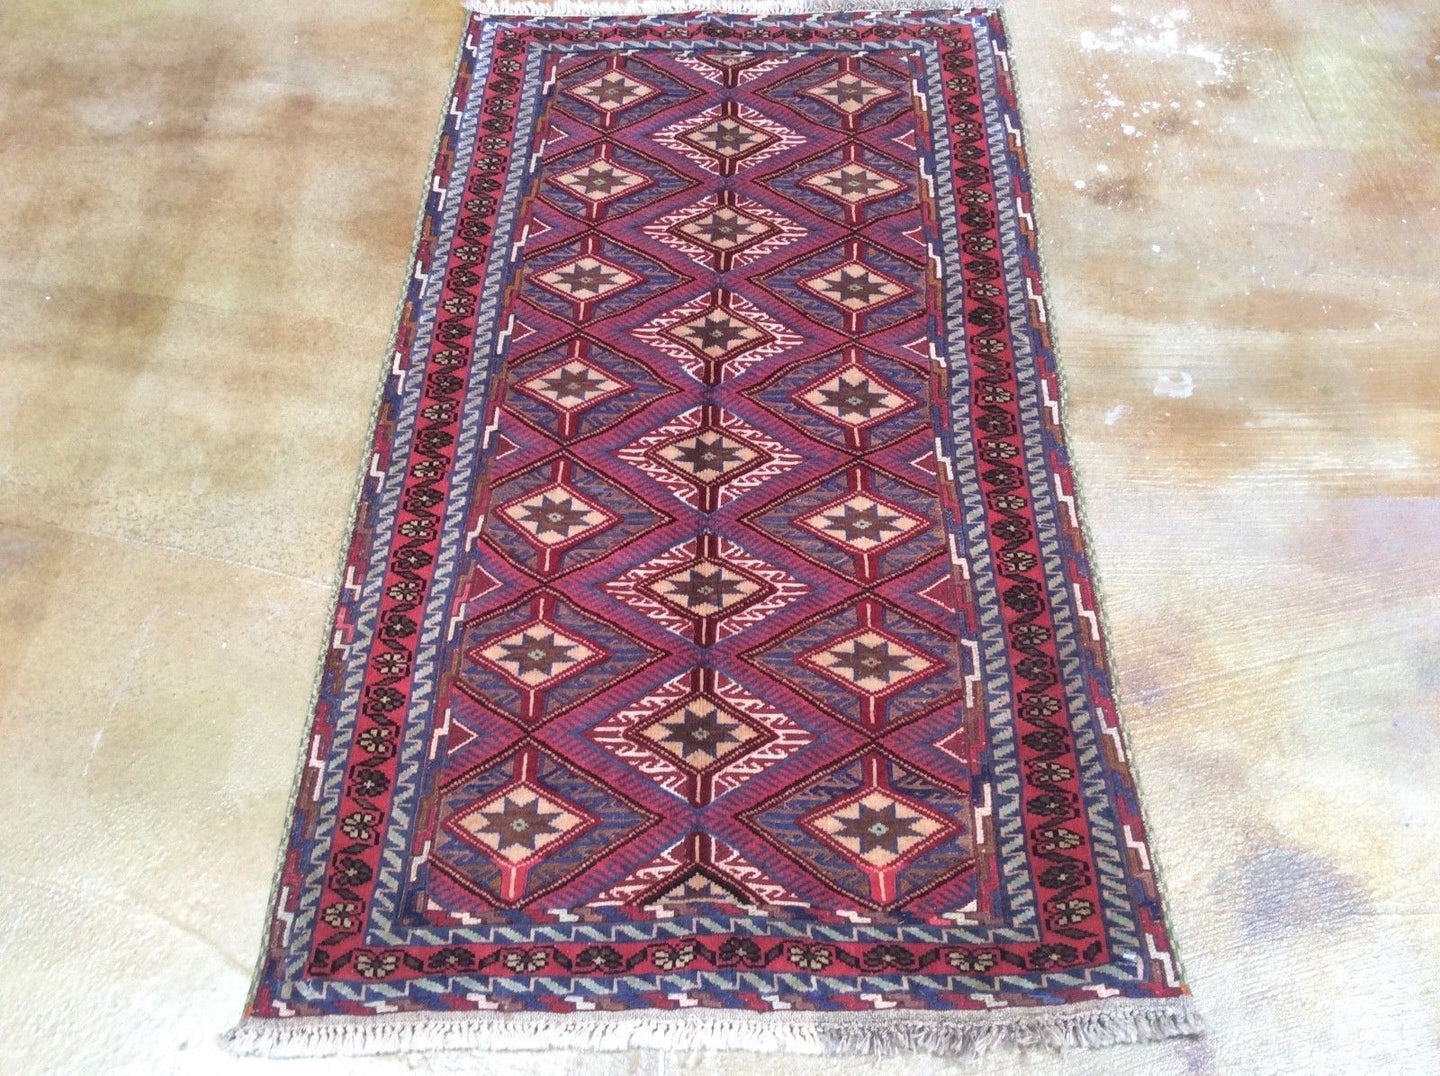 Oriental rugs, hand-knotted carpets, sustainable rugs, classic world oriental rugs, handmade, United States, interior design,  Brrsf-471